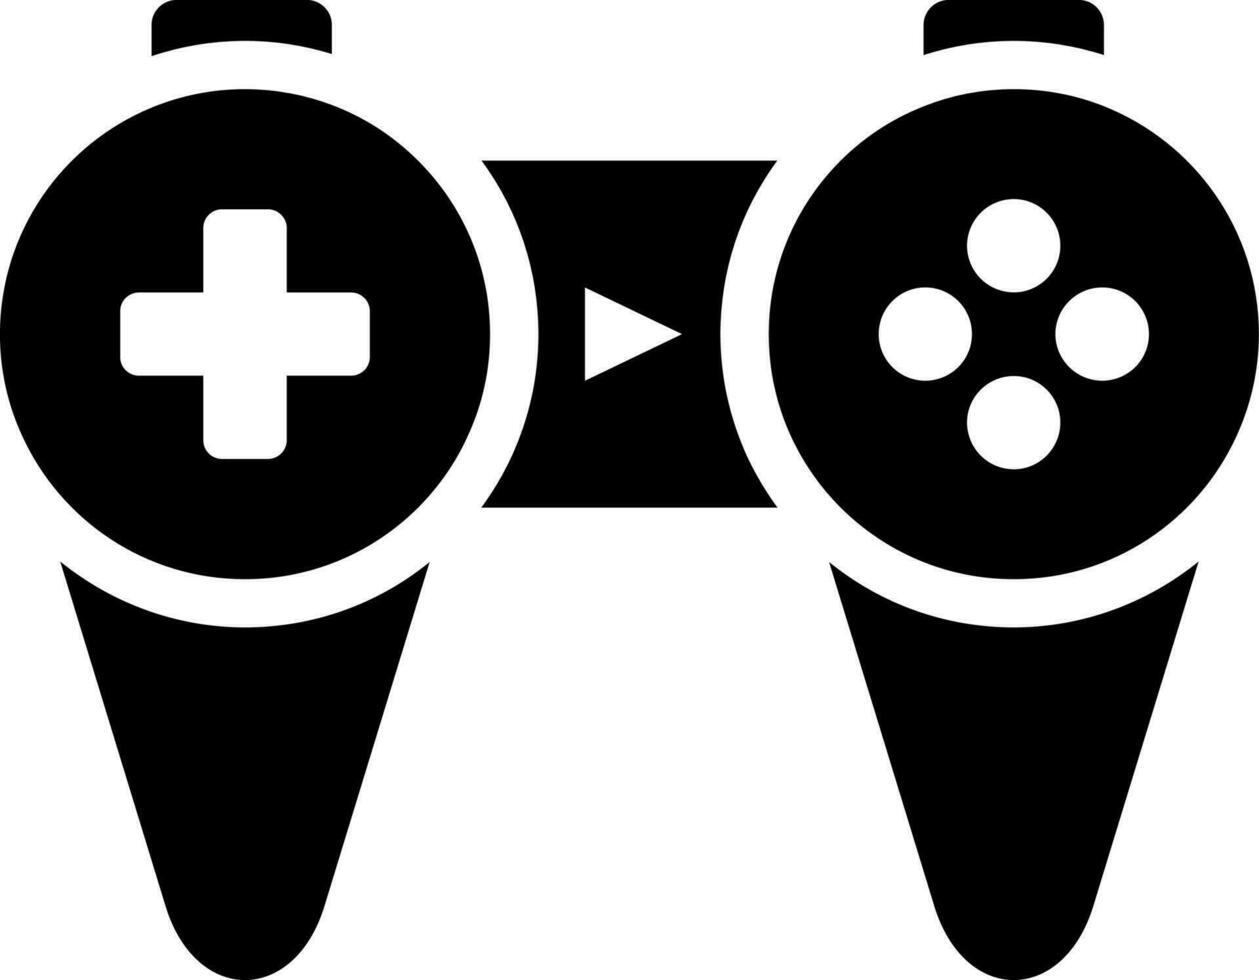 Joystick or game pad icon in Black and White color. vector